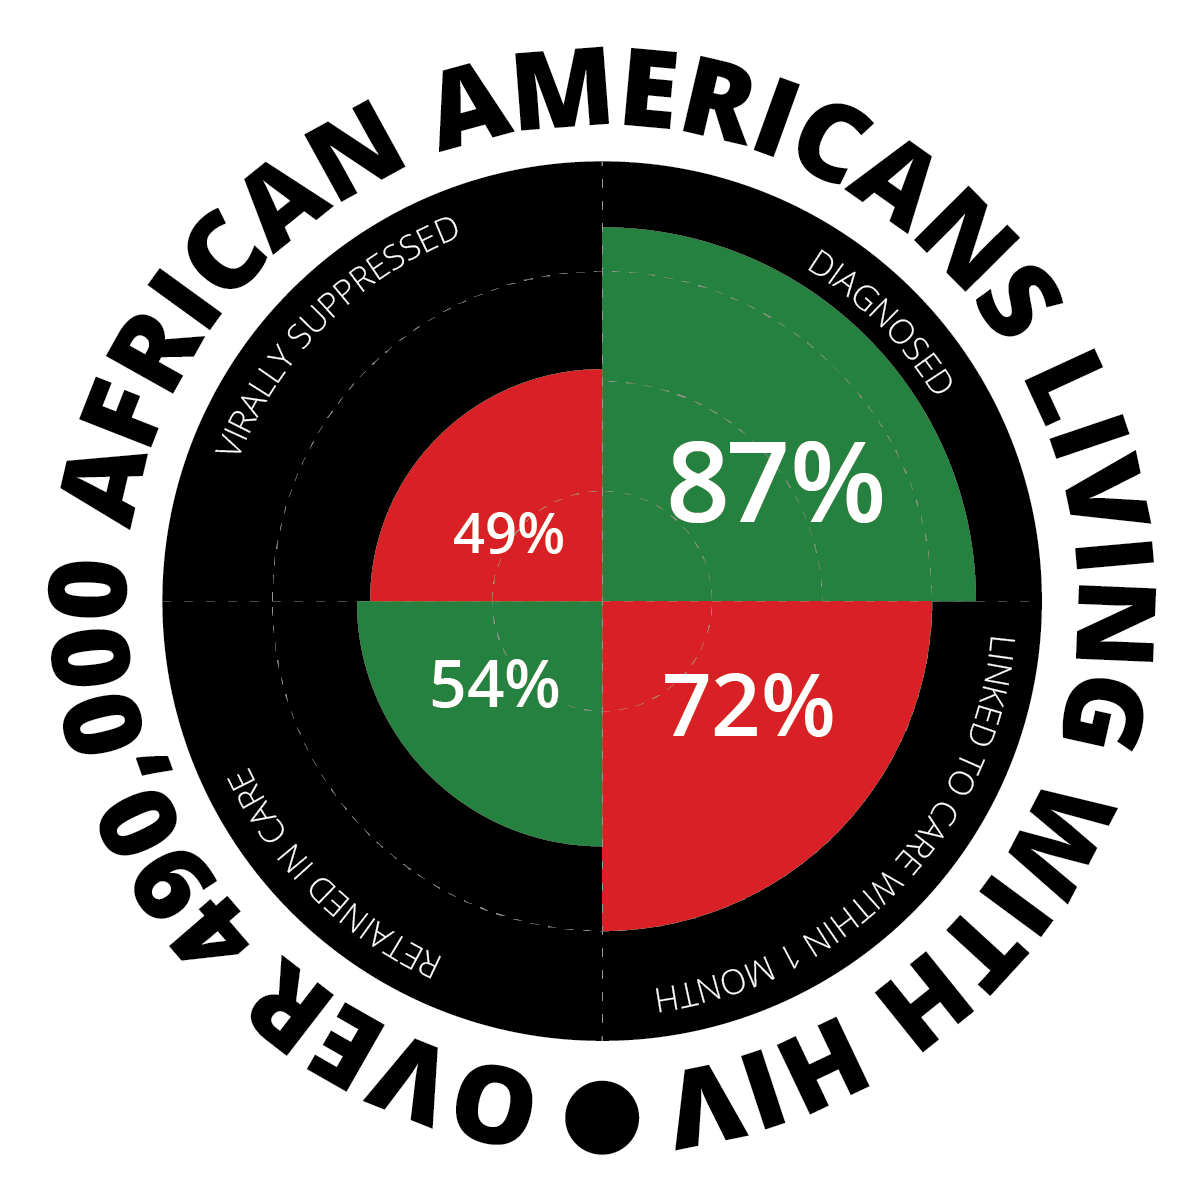 Over 490,000 African Americans living with HIV. 86% diagnosed. 40% engaged in care. 37% prescribed ART. 29% virally suppressed.